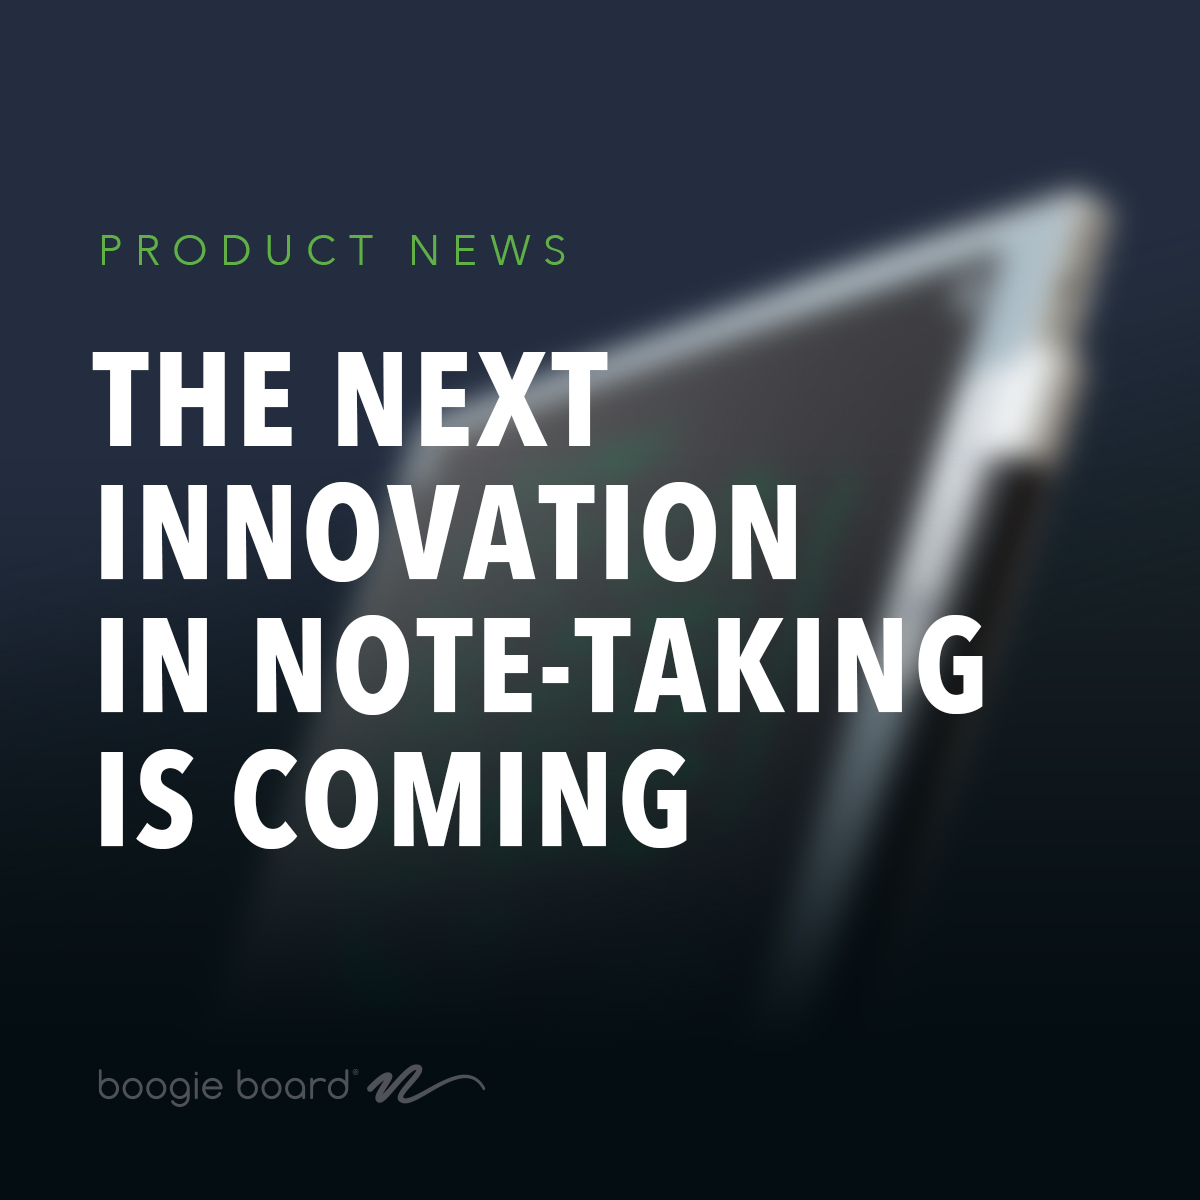 💡Exciting News! Our boldest #NoteTaking solution to date is almost here.✨Head to myboogieboard.com, scroll to the bottom, and sign up for our email list to be alerted ahead of the crowd once pre-order is live. #TechLaunch #BoogieBoard #MyBoogieBoard #Innovation